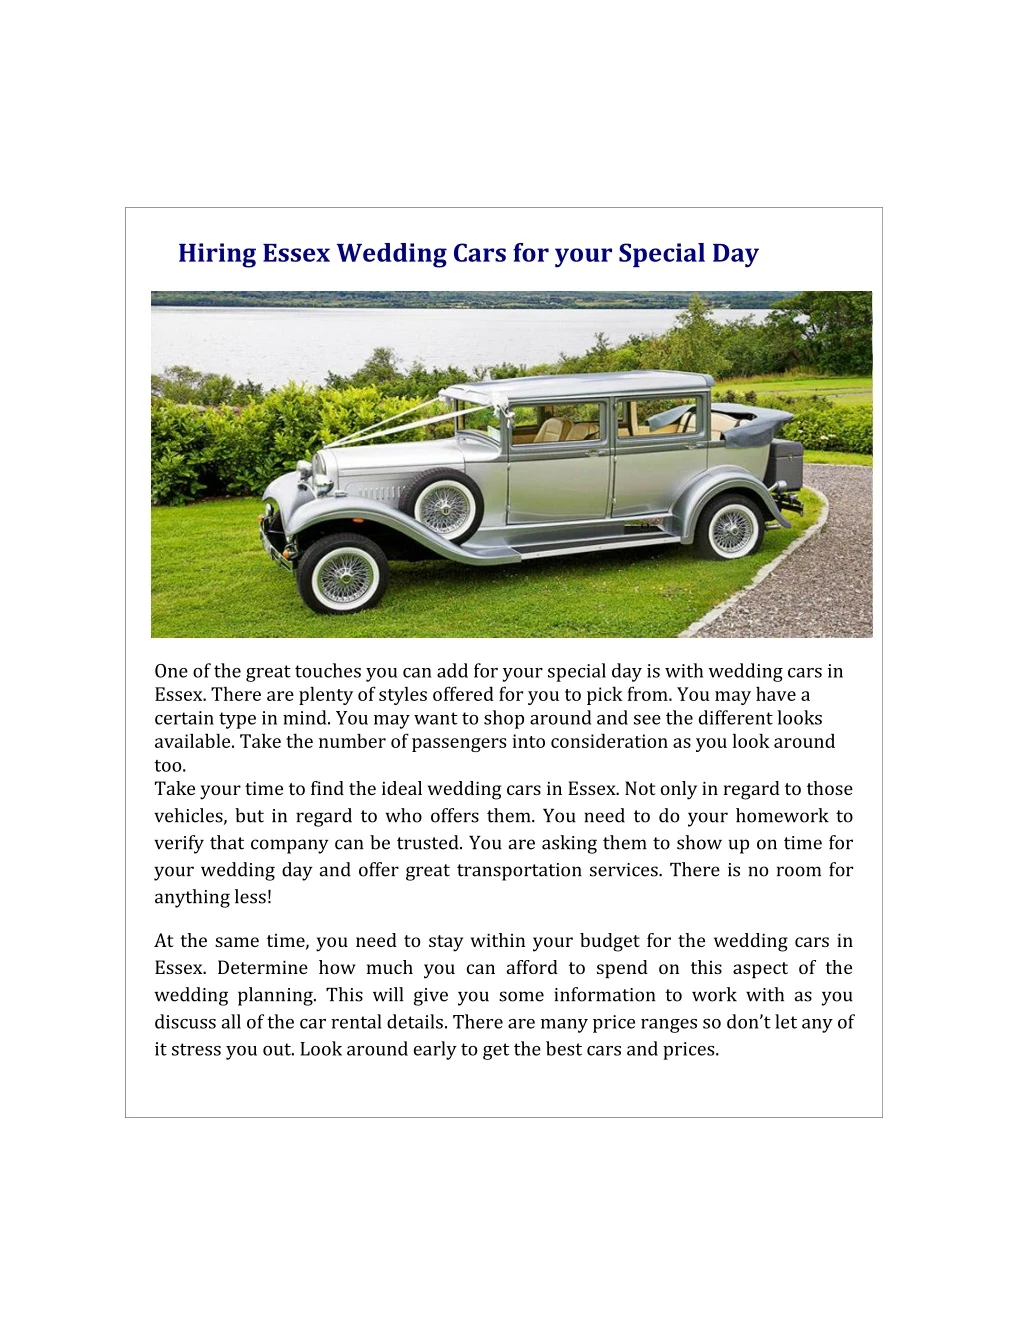 hiring essex wedding cars for your special day